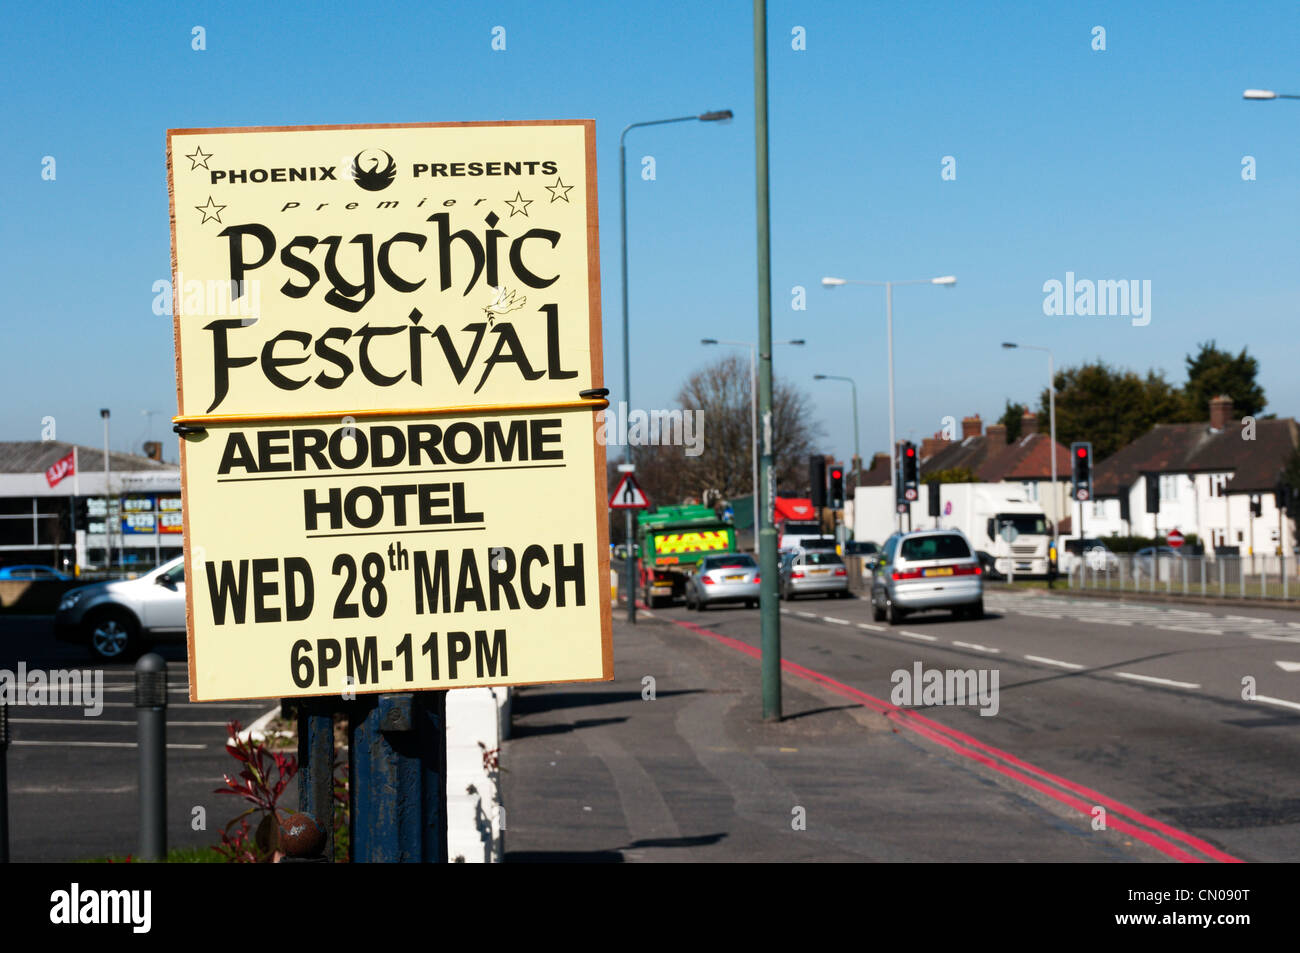 Sign for a Psychic Festival at the Aerodrome Hotel on the Purley Way, Croydon. Stock Photo